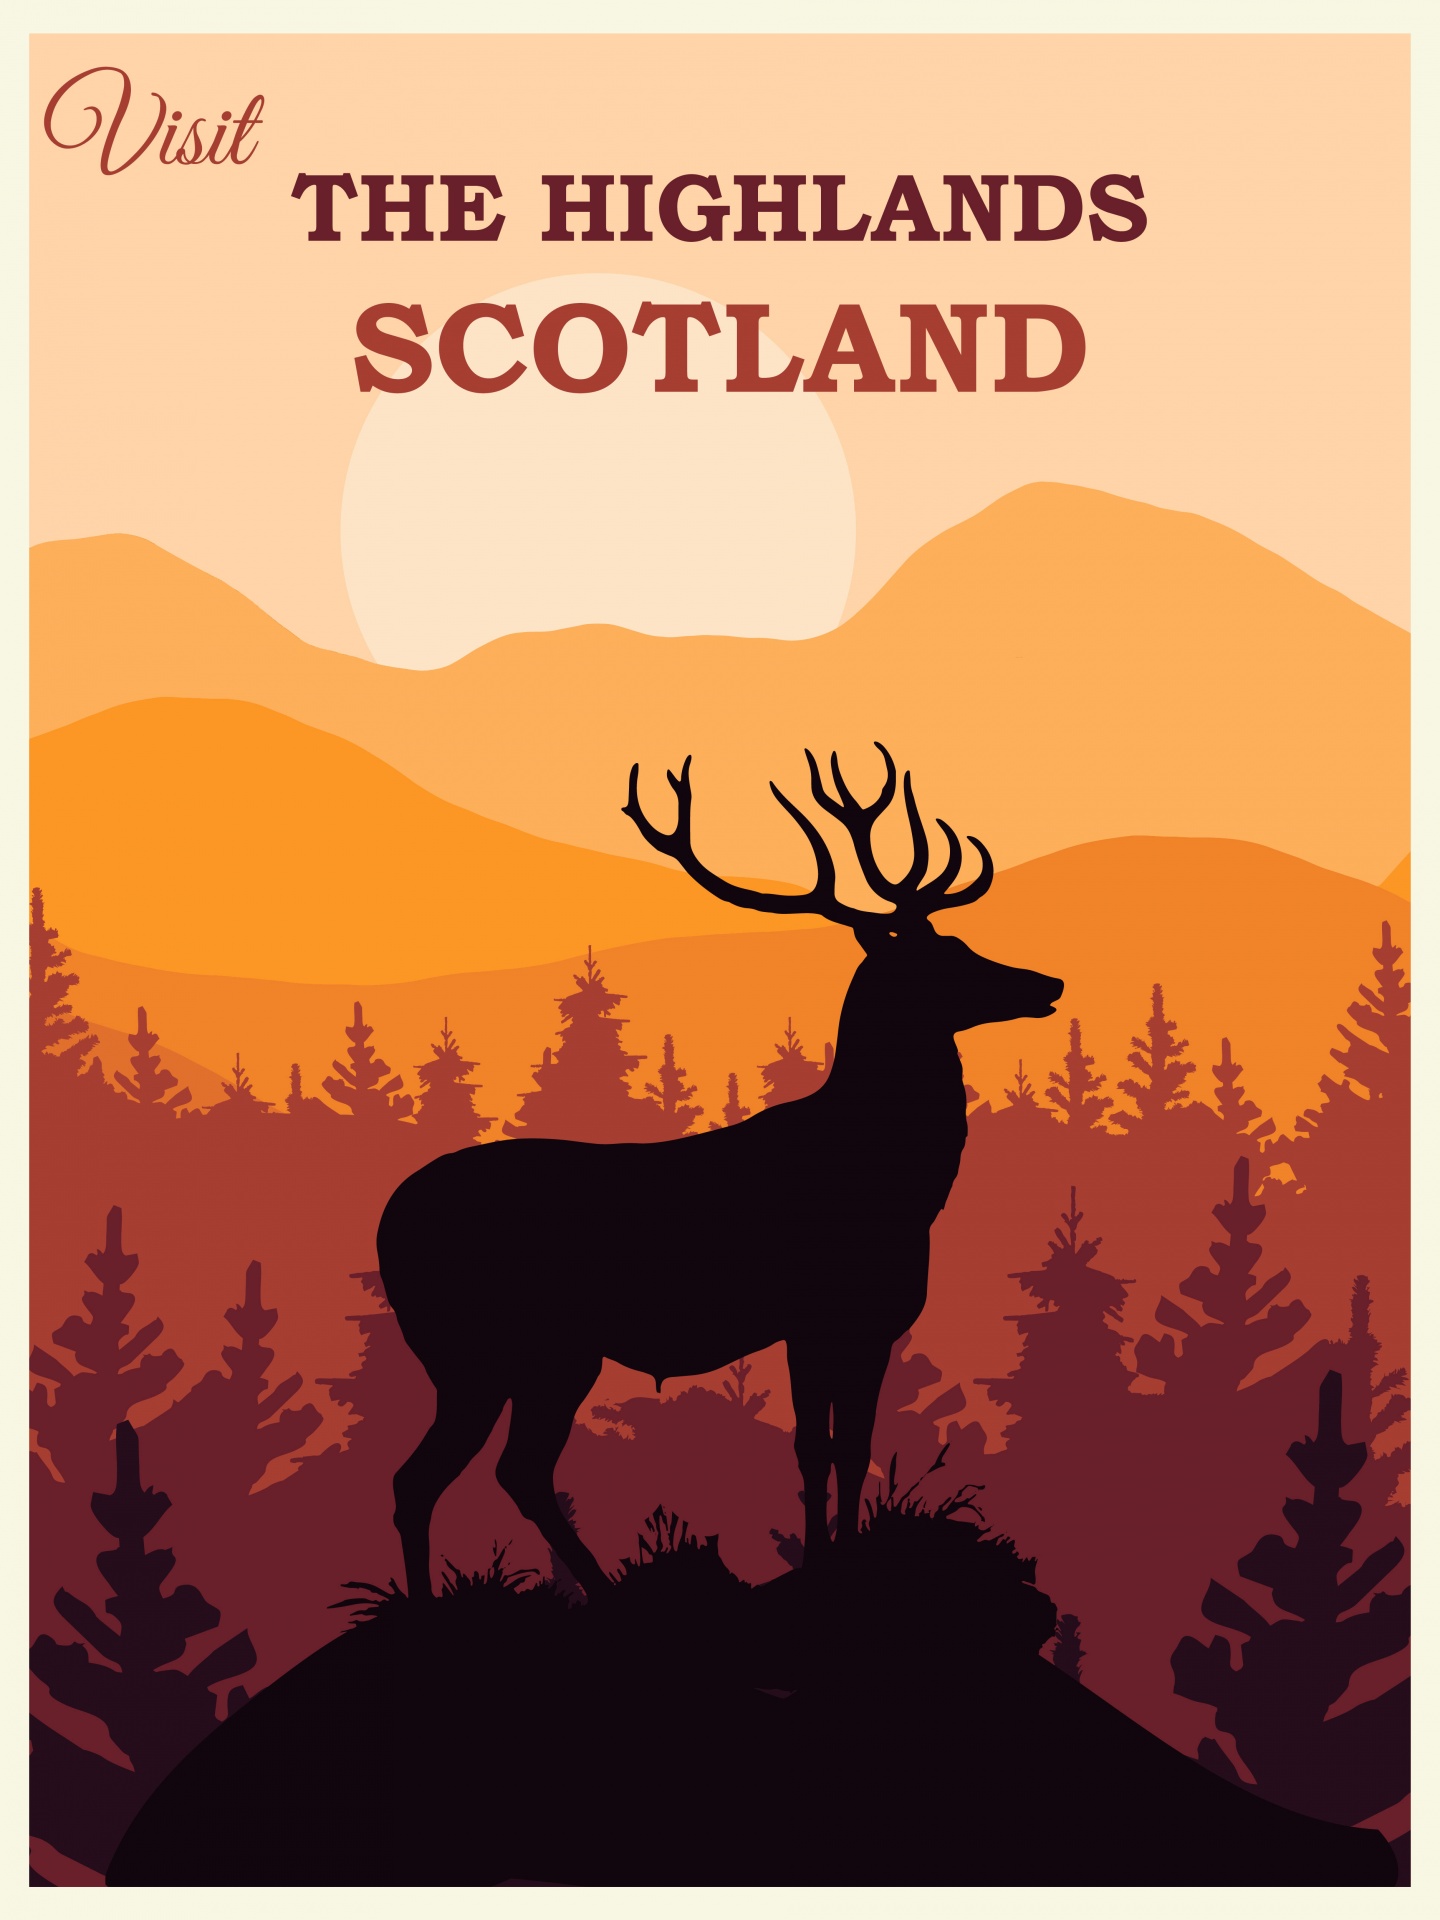 Retro, vintage style yet modern and fresh travel poster for the Scottish Highlands, Scotland, with deer stag, forest and mountains at sunset